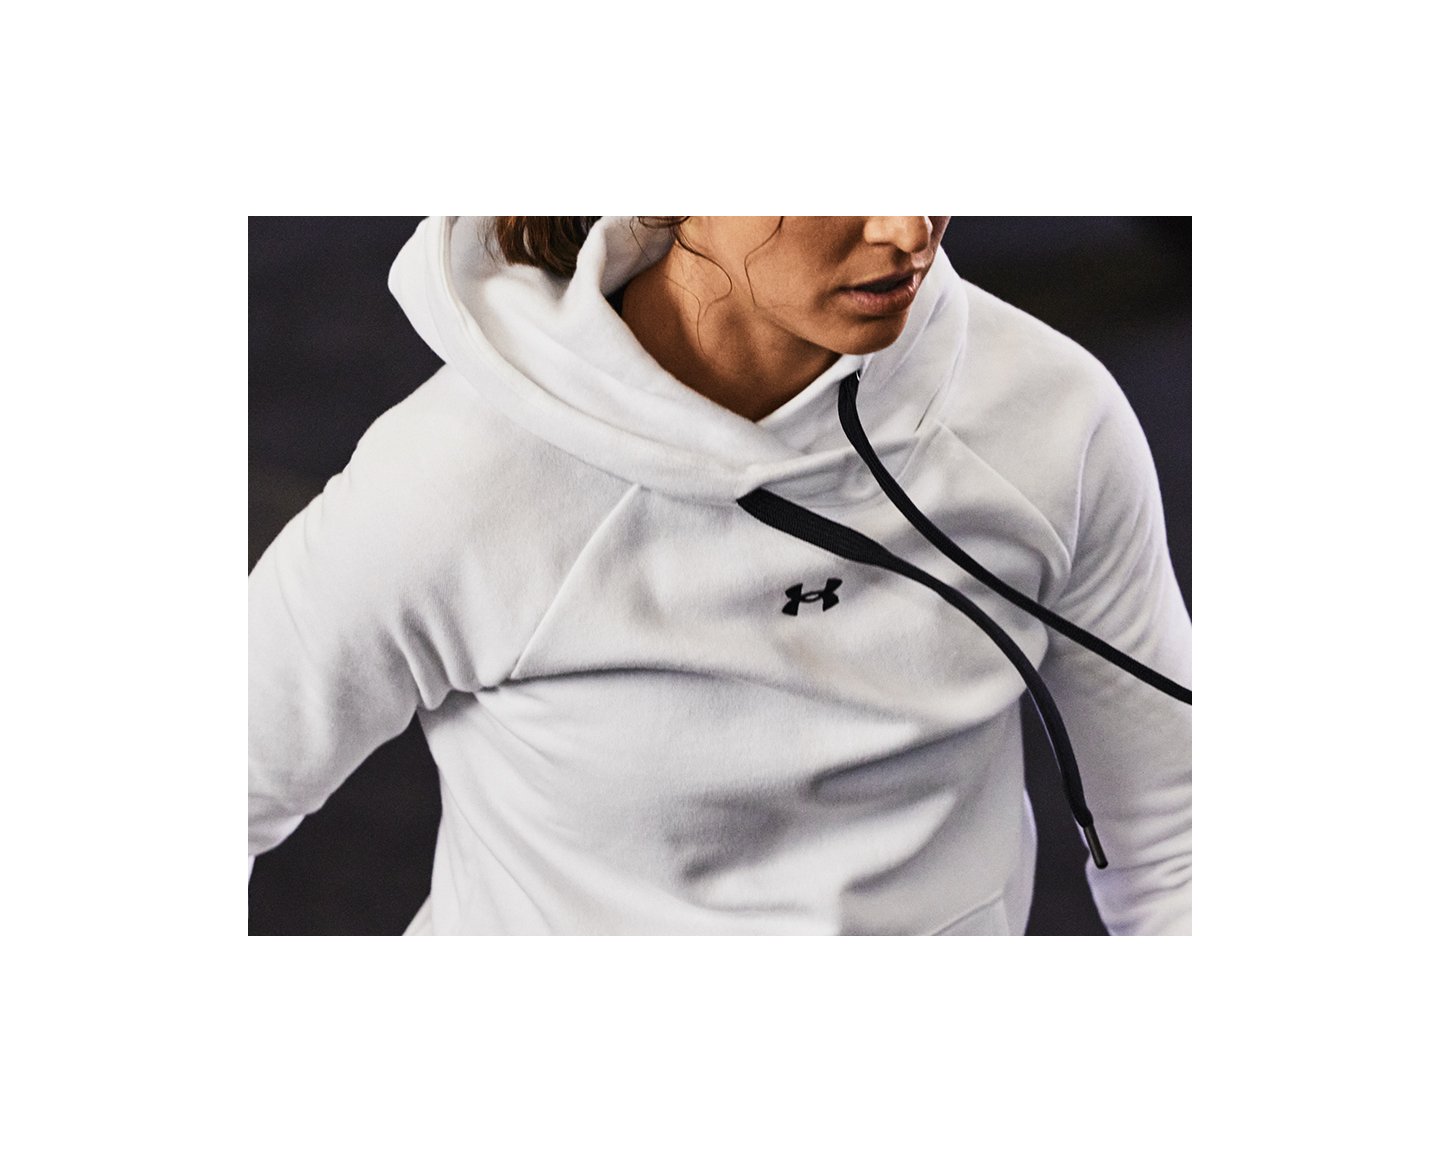 Women's Under Armour Royal Blue Hoodie (1298415-984) (Option 1) x4: £13.95